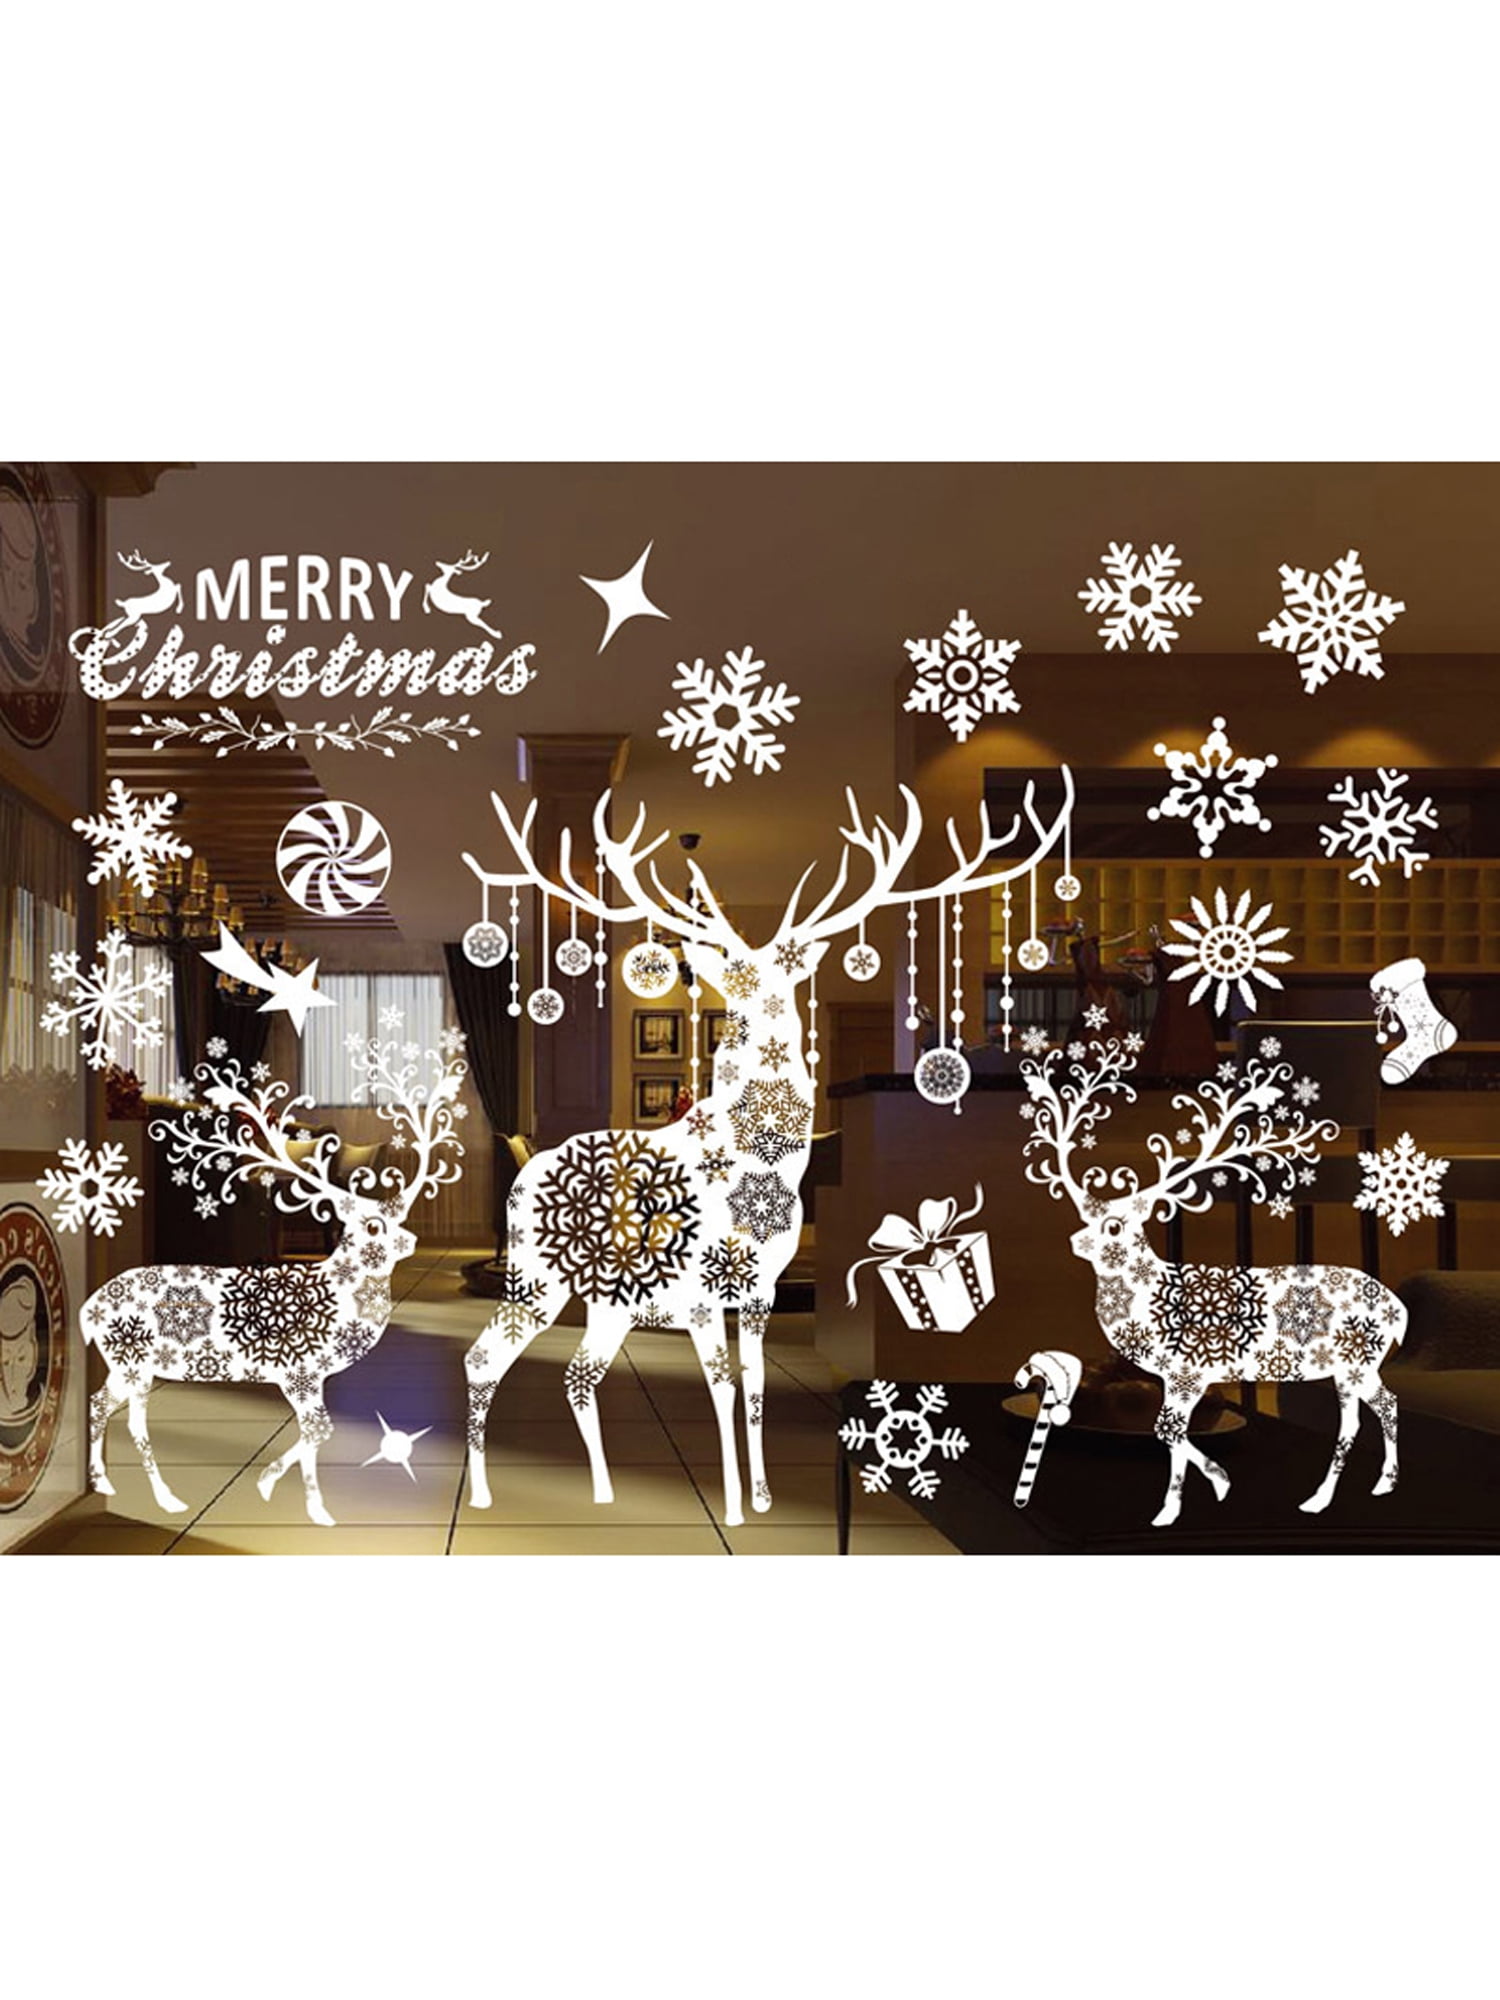 Christmas Santa Removable Window Stickers Decal Wall Reindeer Home Arts Decor 